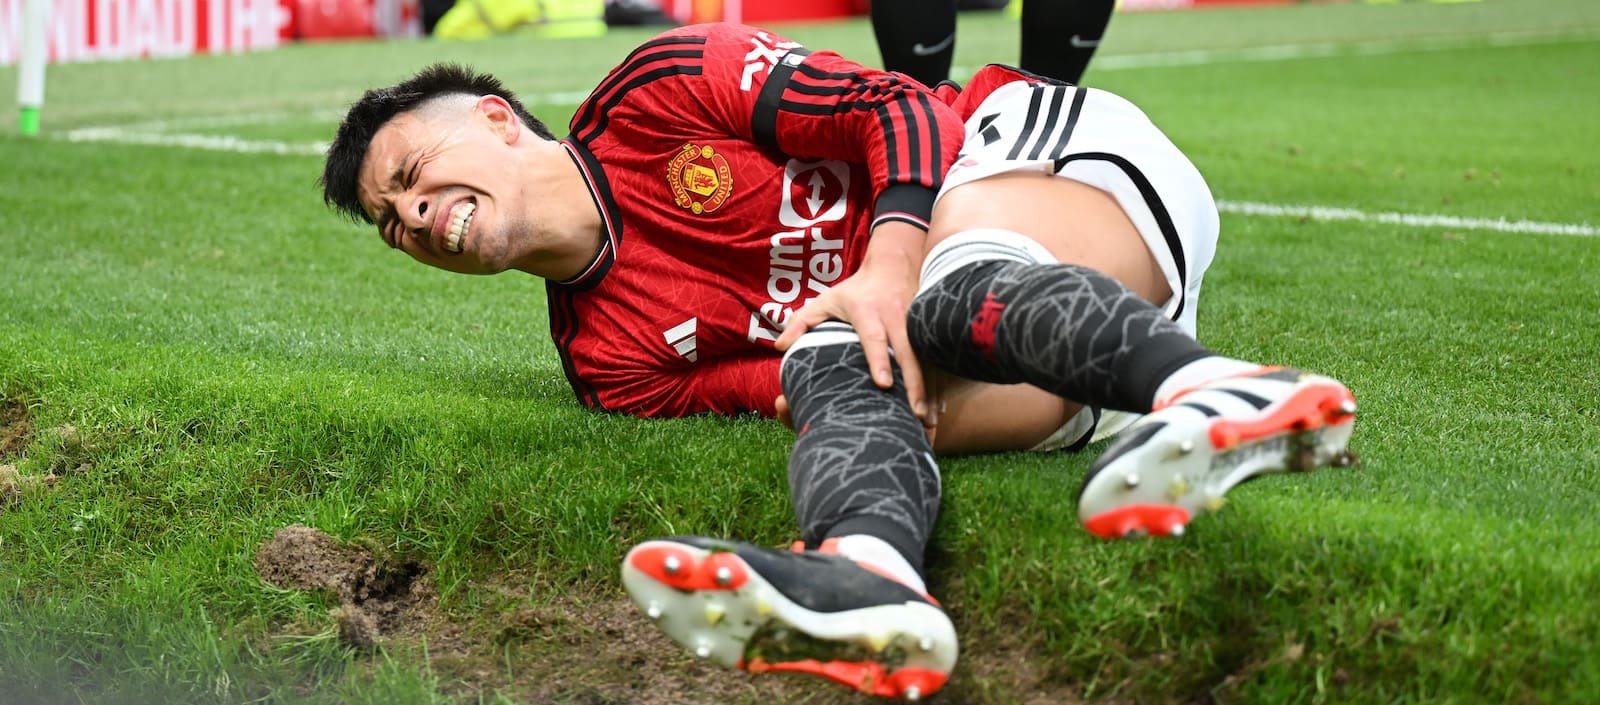 “It kills it ”: Rio Ferdinand expresses fears of Man United’s form being halted after Lisandro Martinez injury blow – Man United News And Transfer News